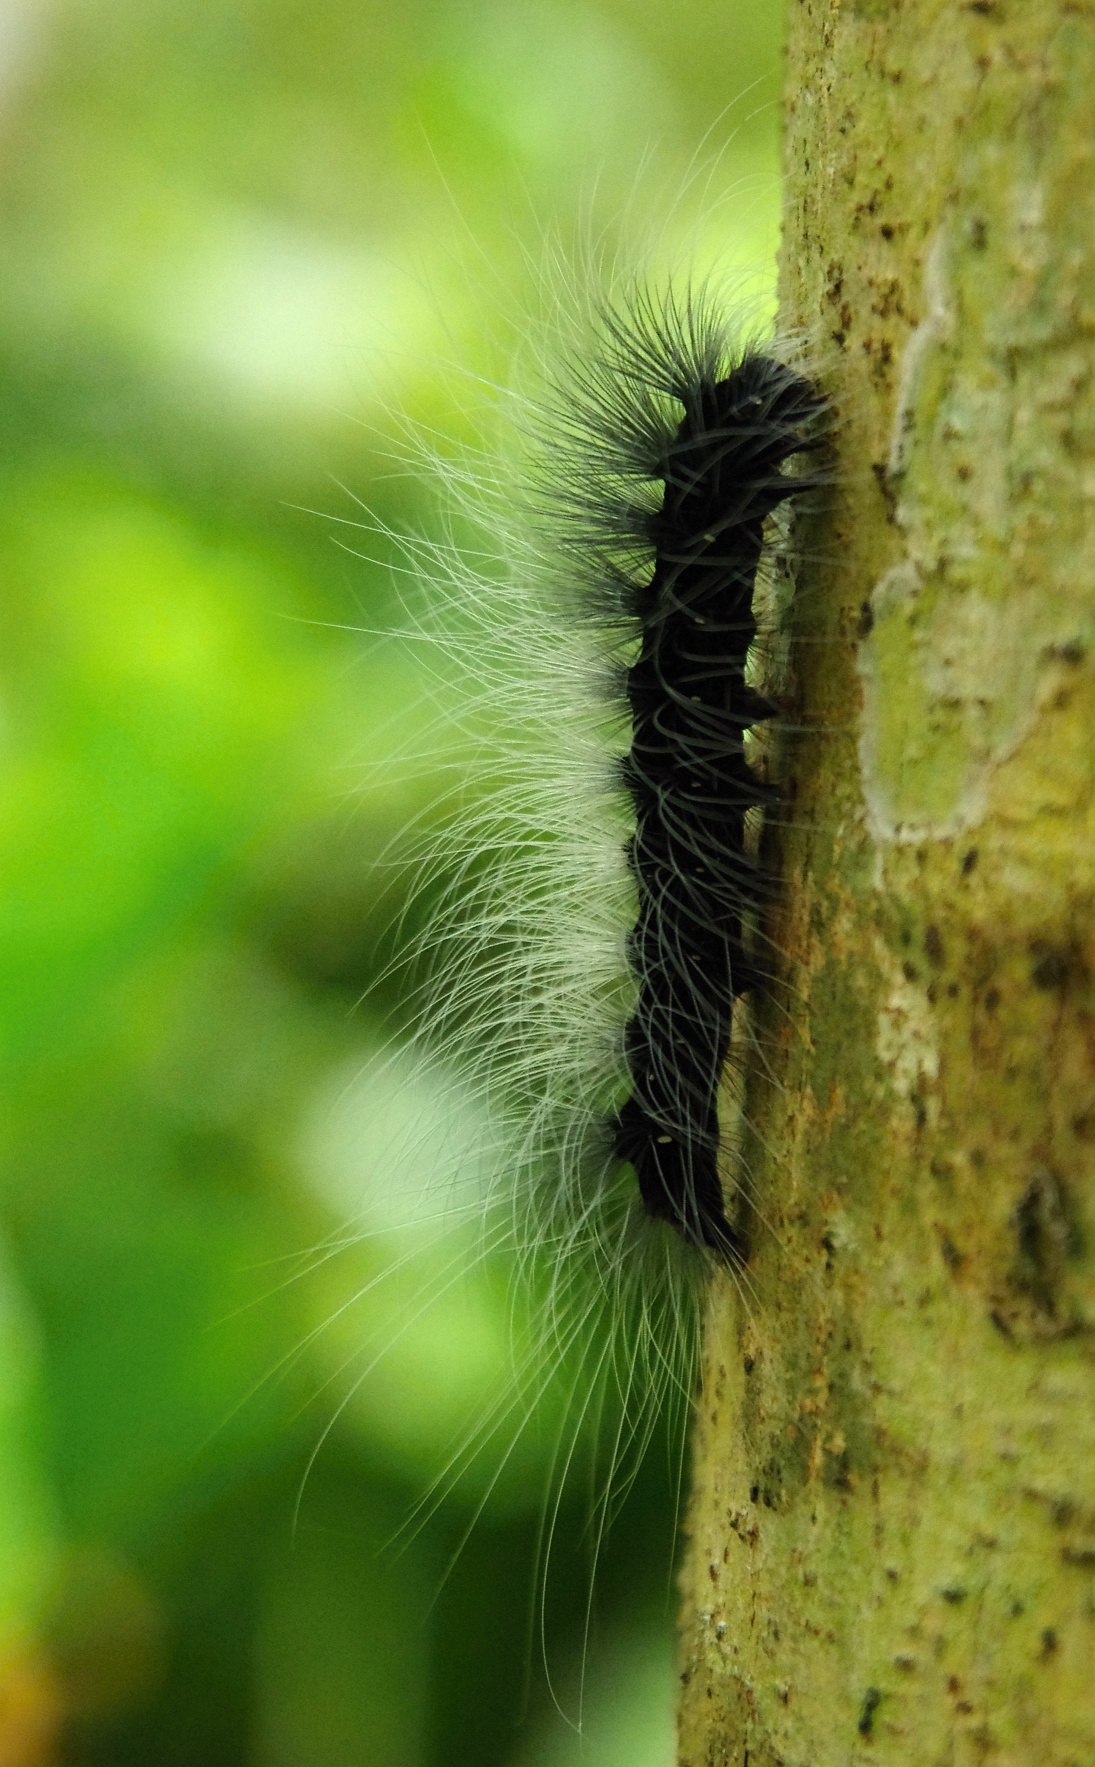 a black caterpillar is clinging to the side of a tree